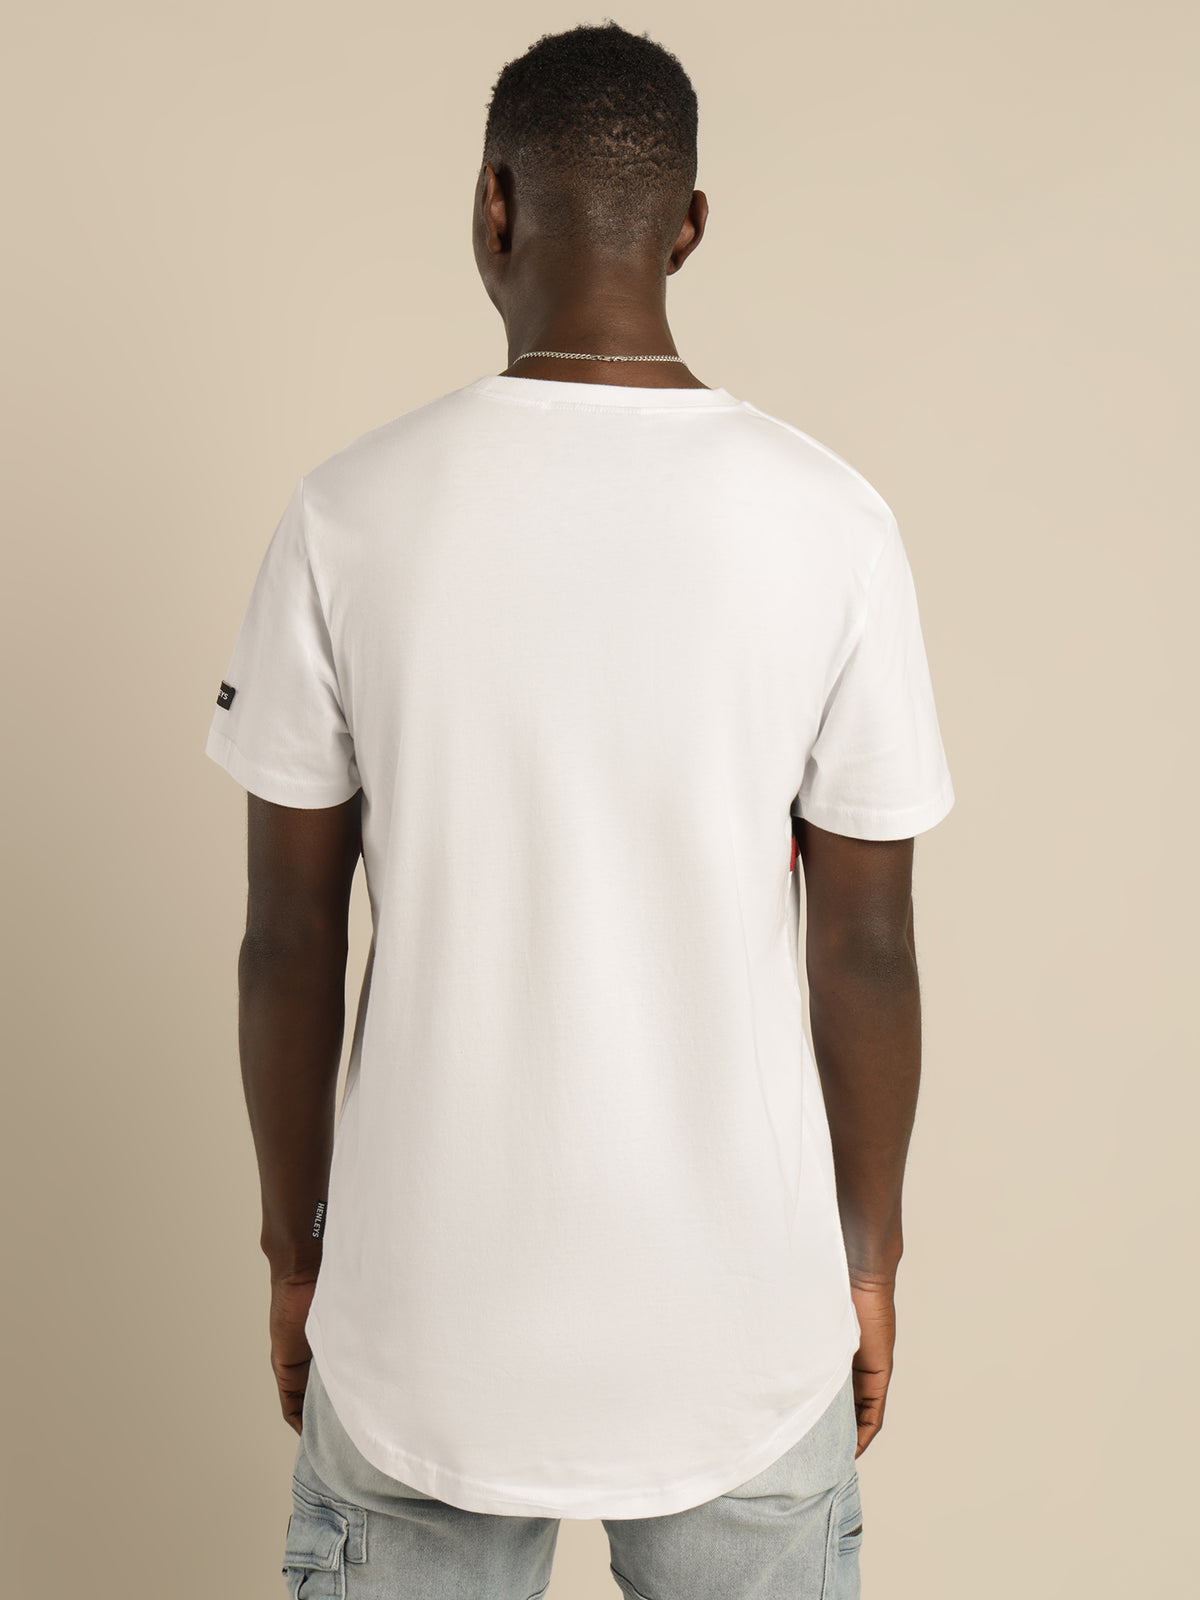 Championship Loose T-Shirt in White